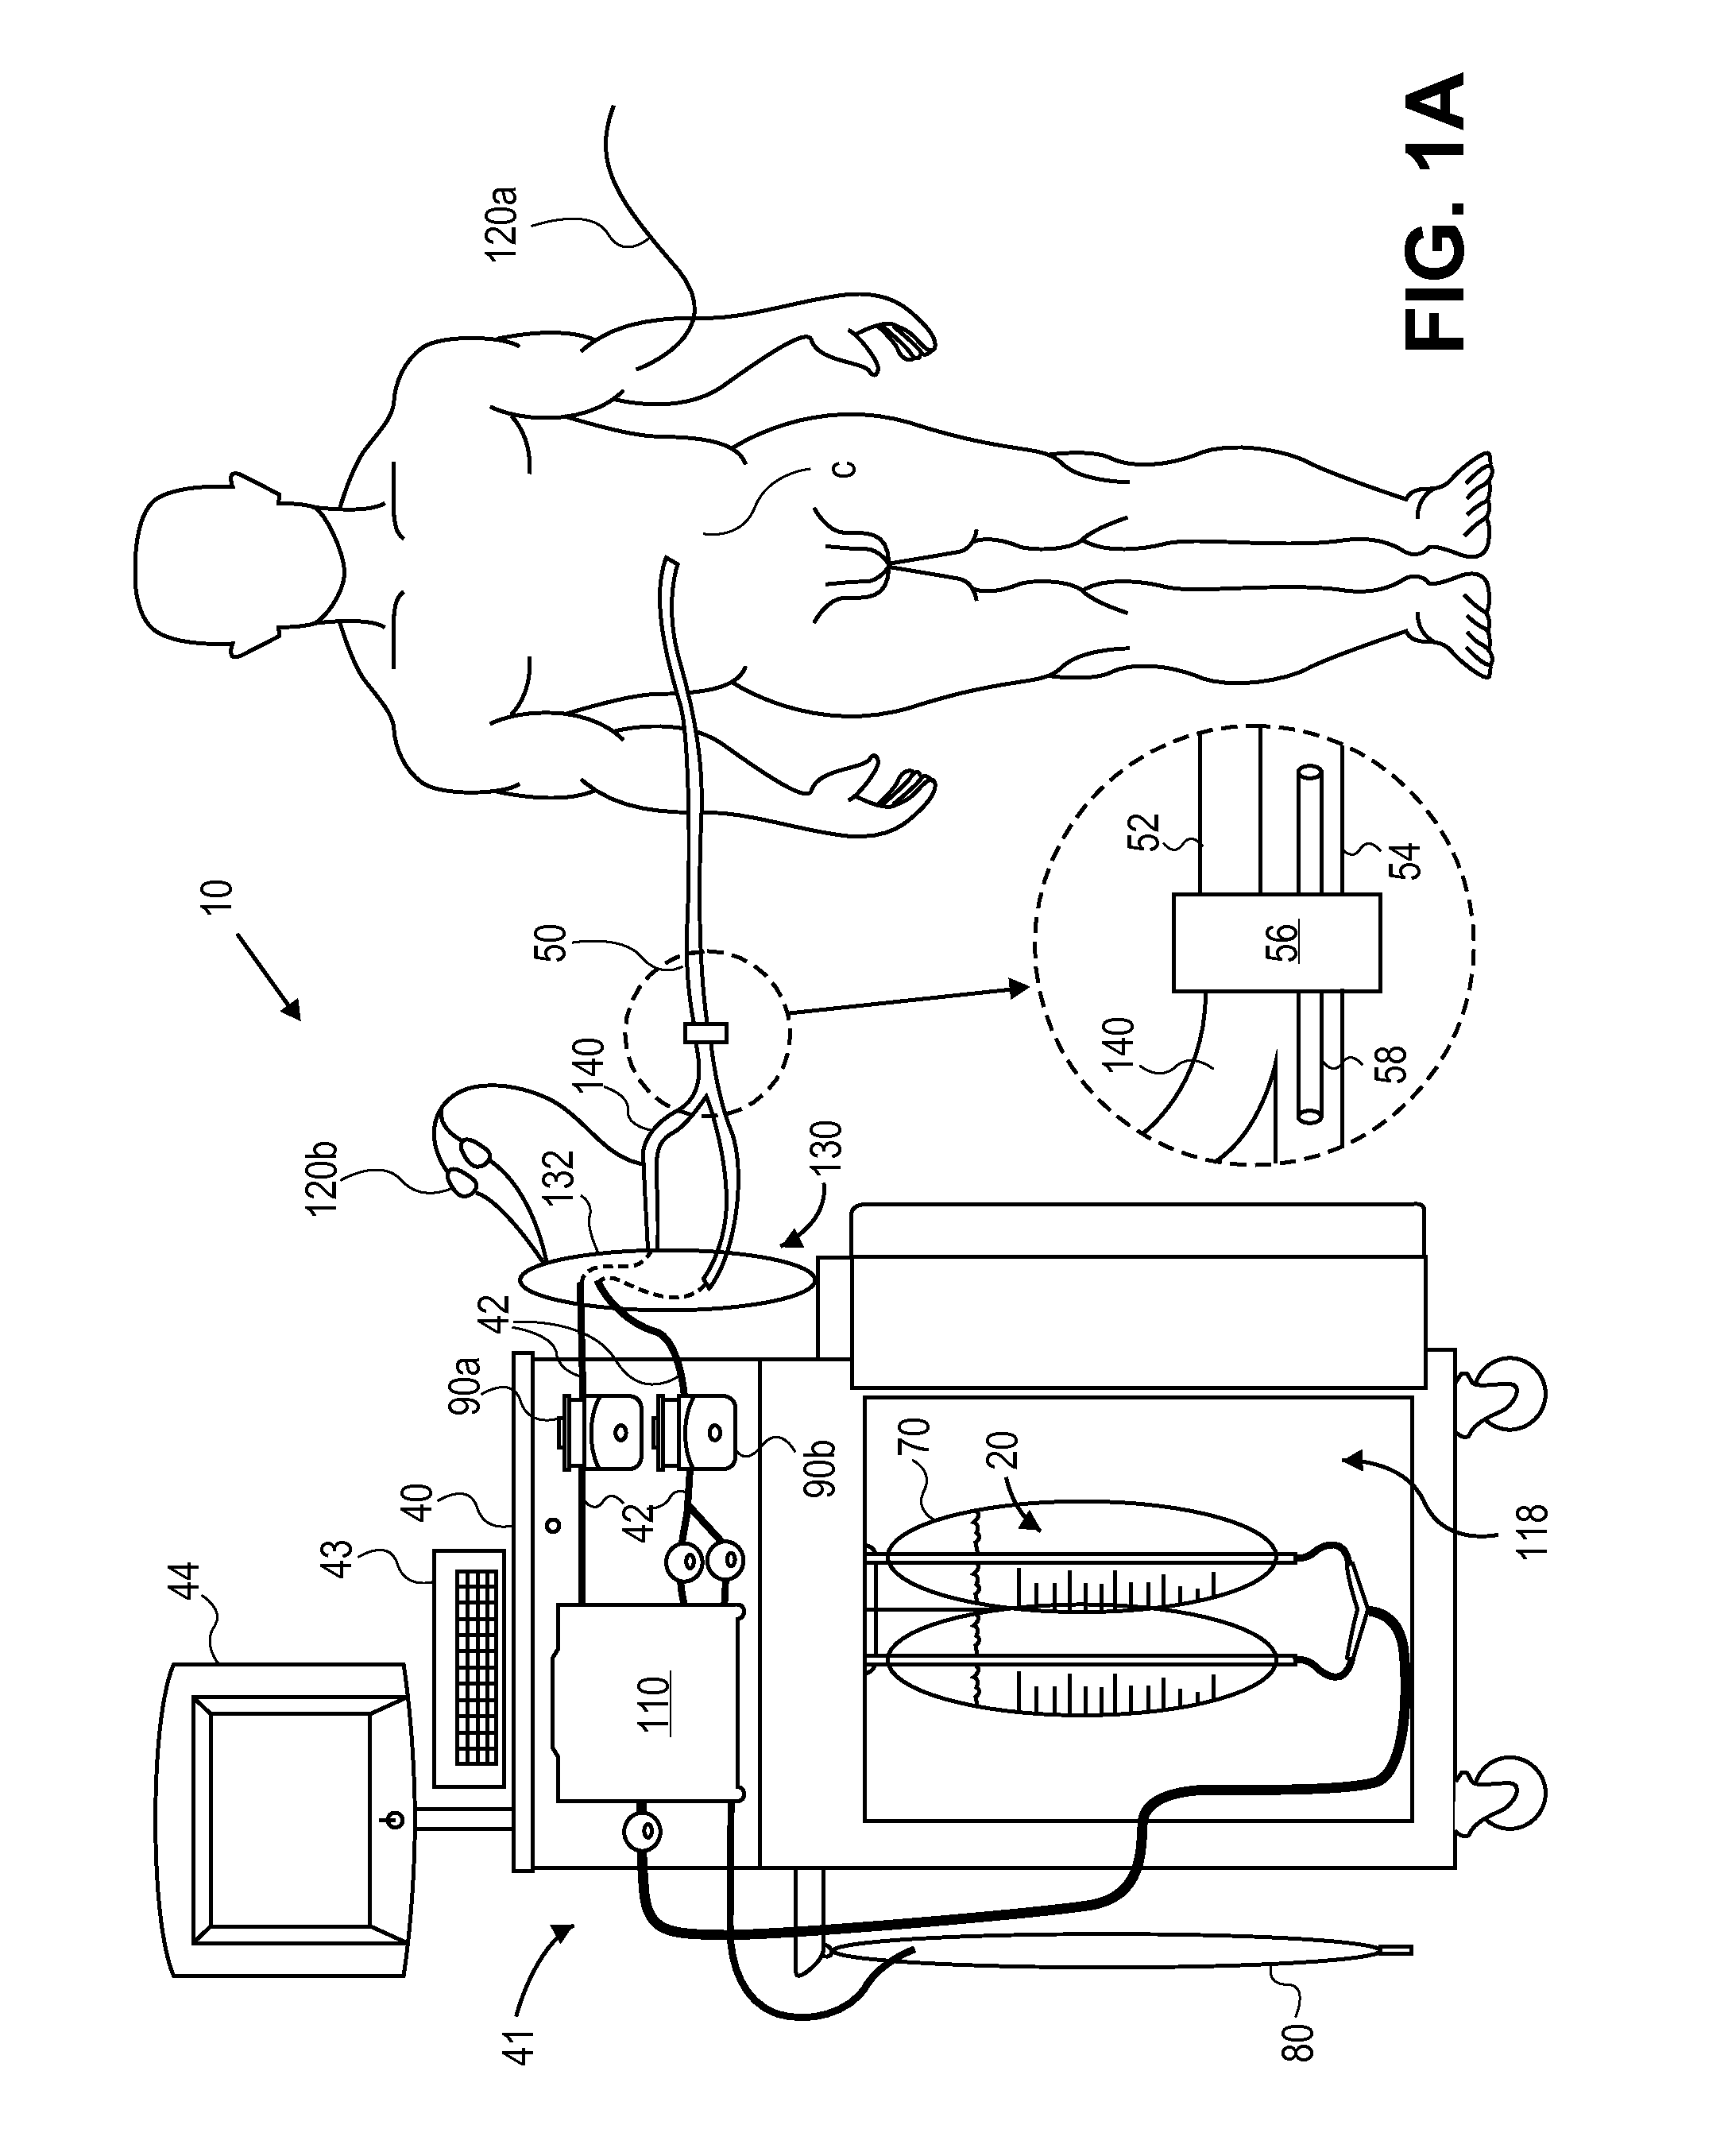 Method and Apparatus for Inducing Therapeutic Hypothermia